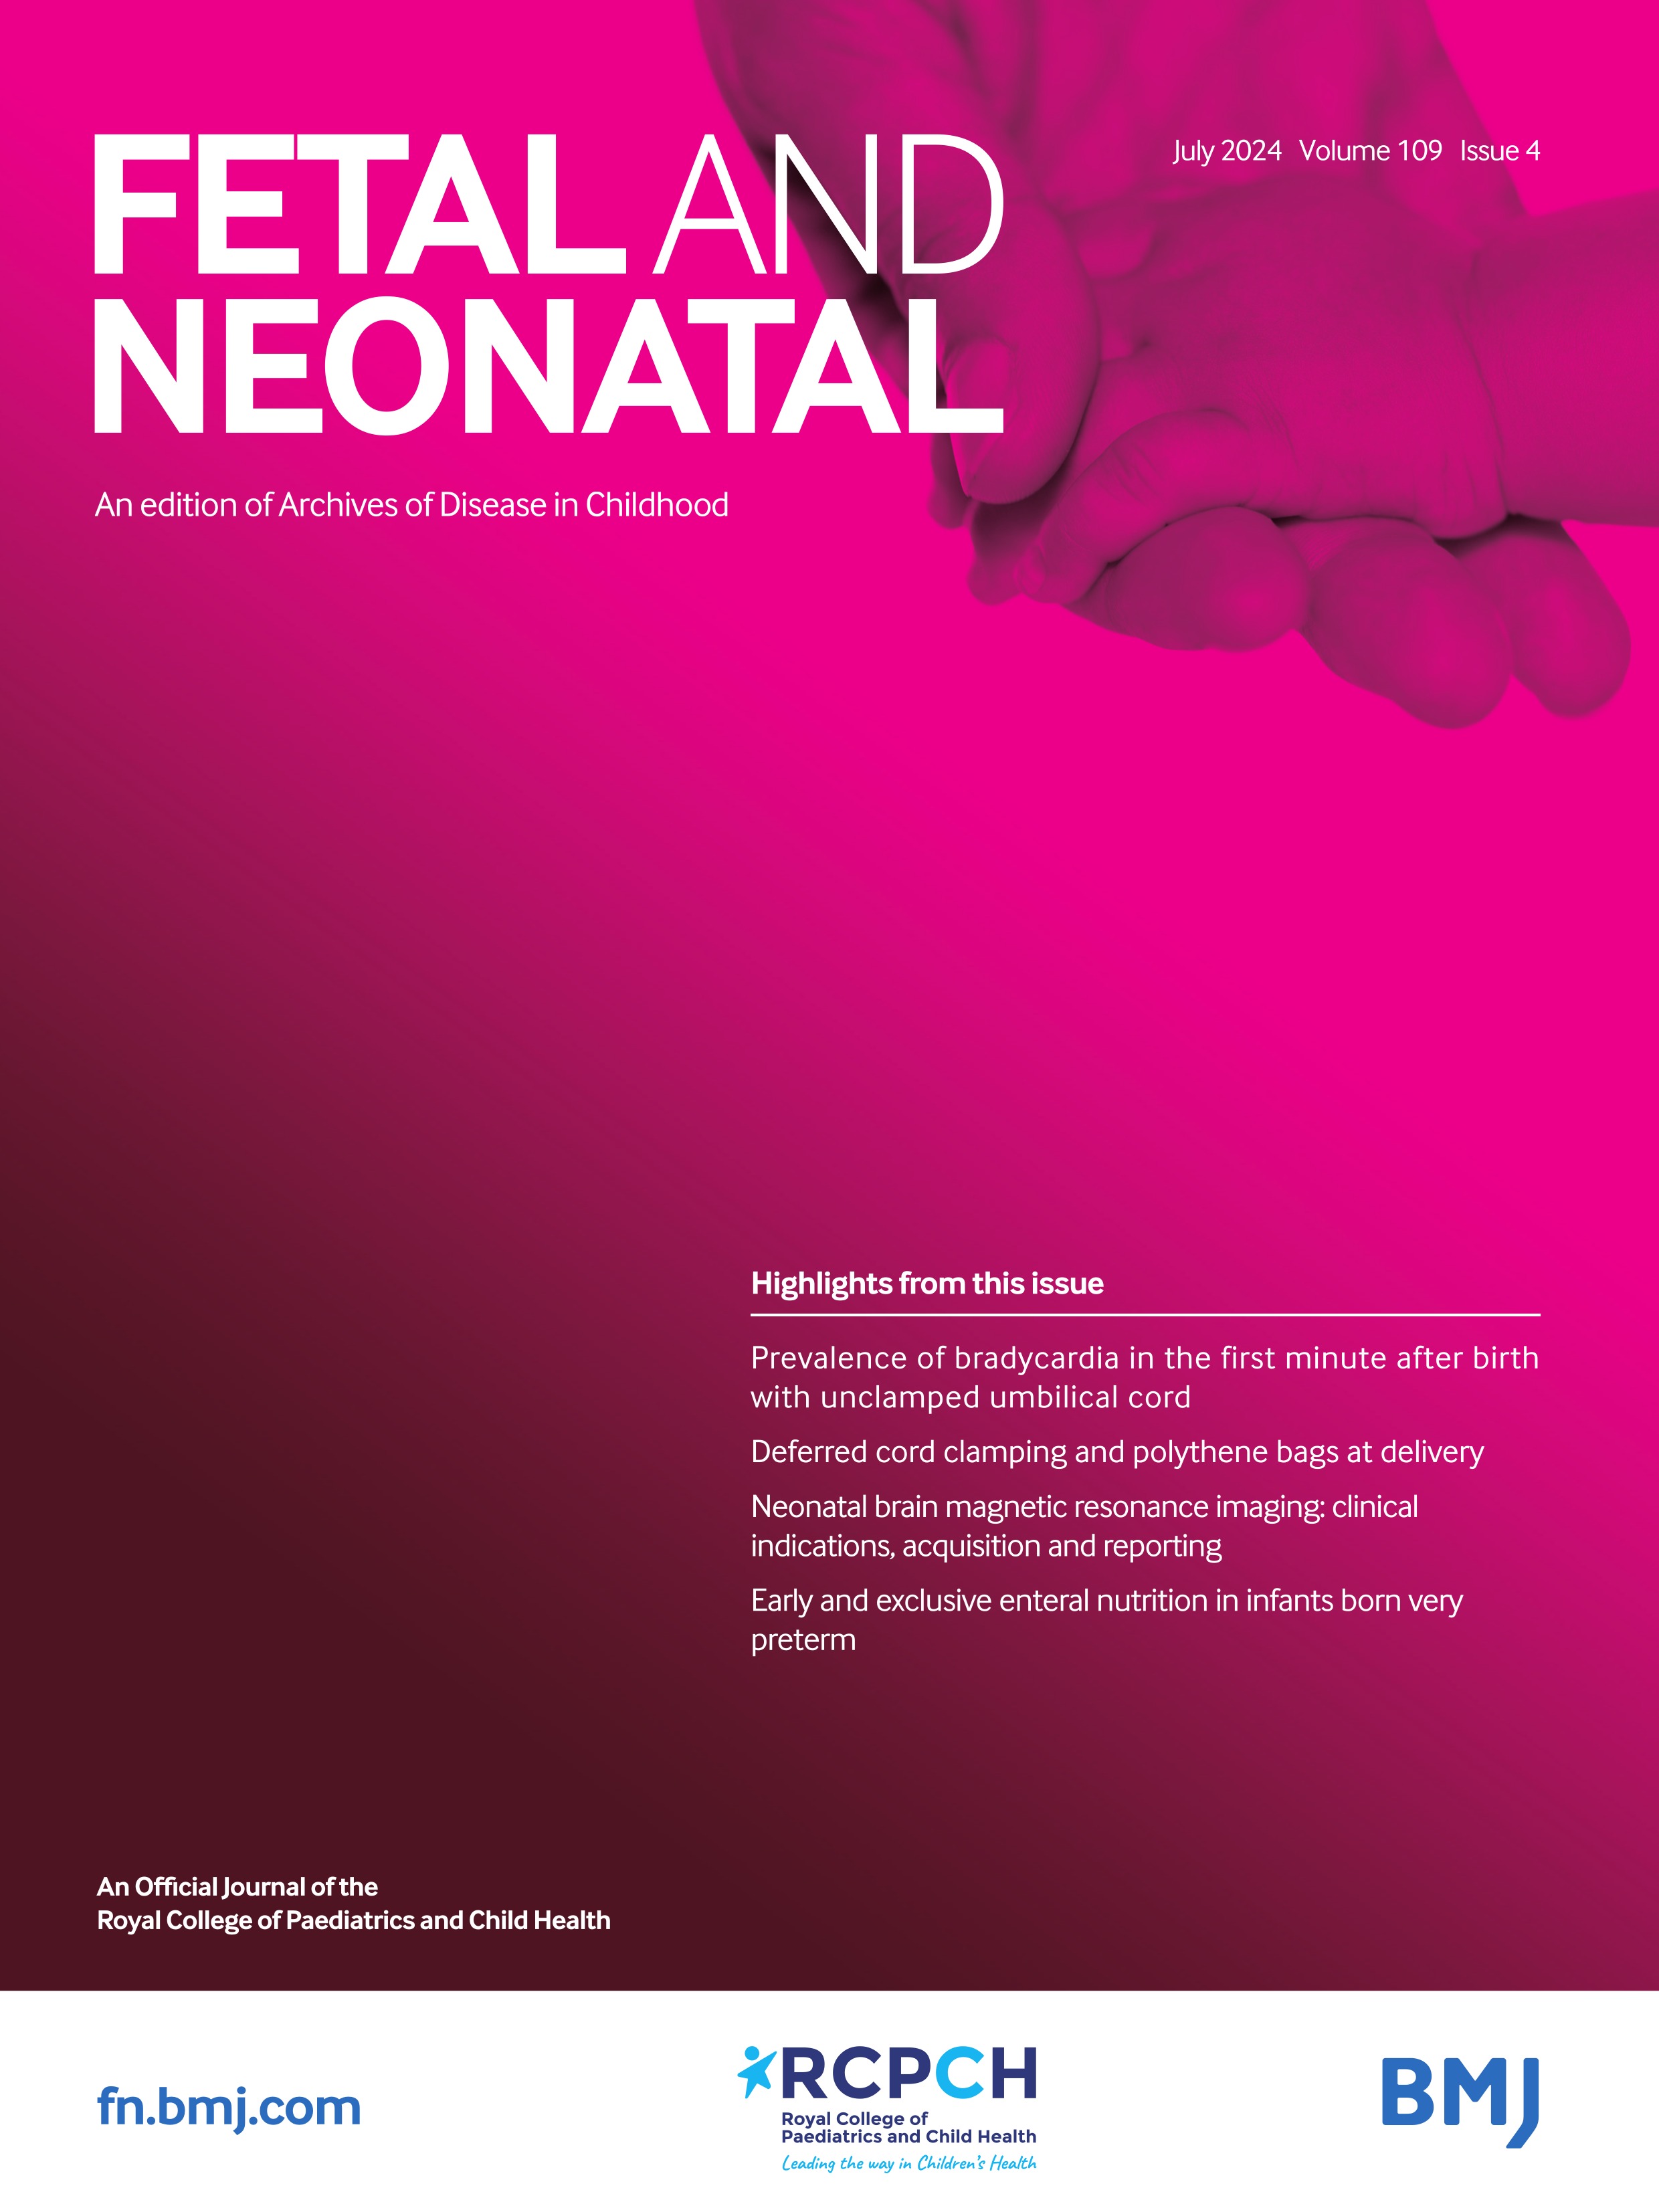 Non-invasive high-frequency oscillatory ventilation (NHFOV) versus nasal continuous positive airway pressure (NCPAP) for preterm infants: a systematic review and meta-analysis